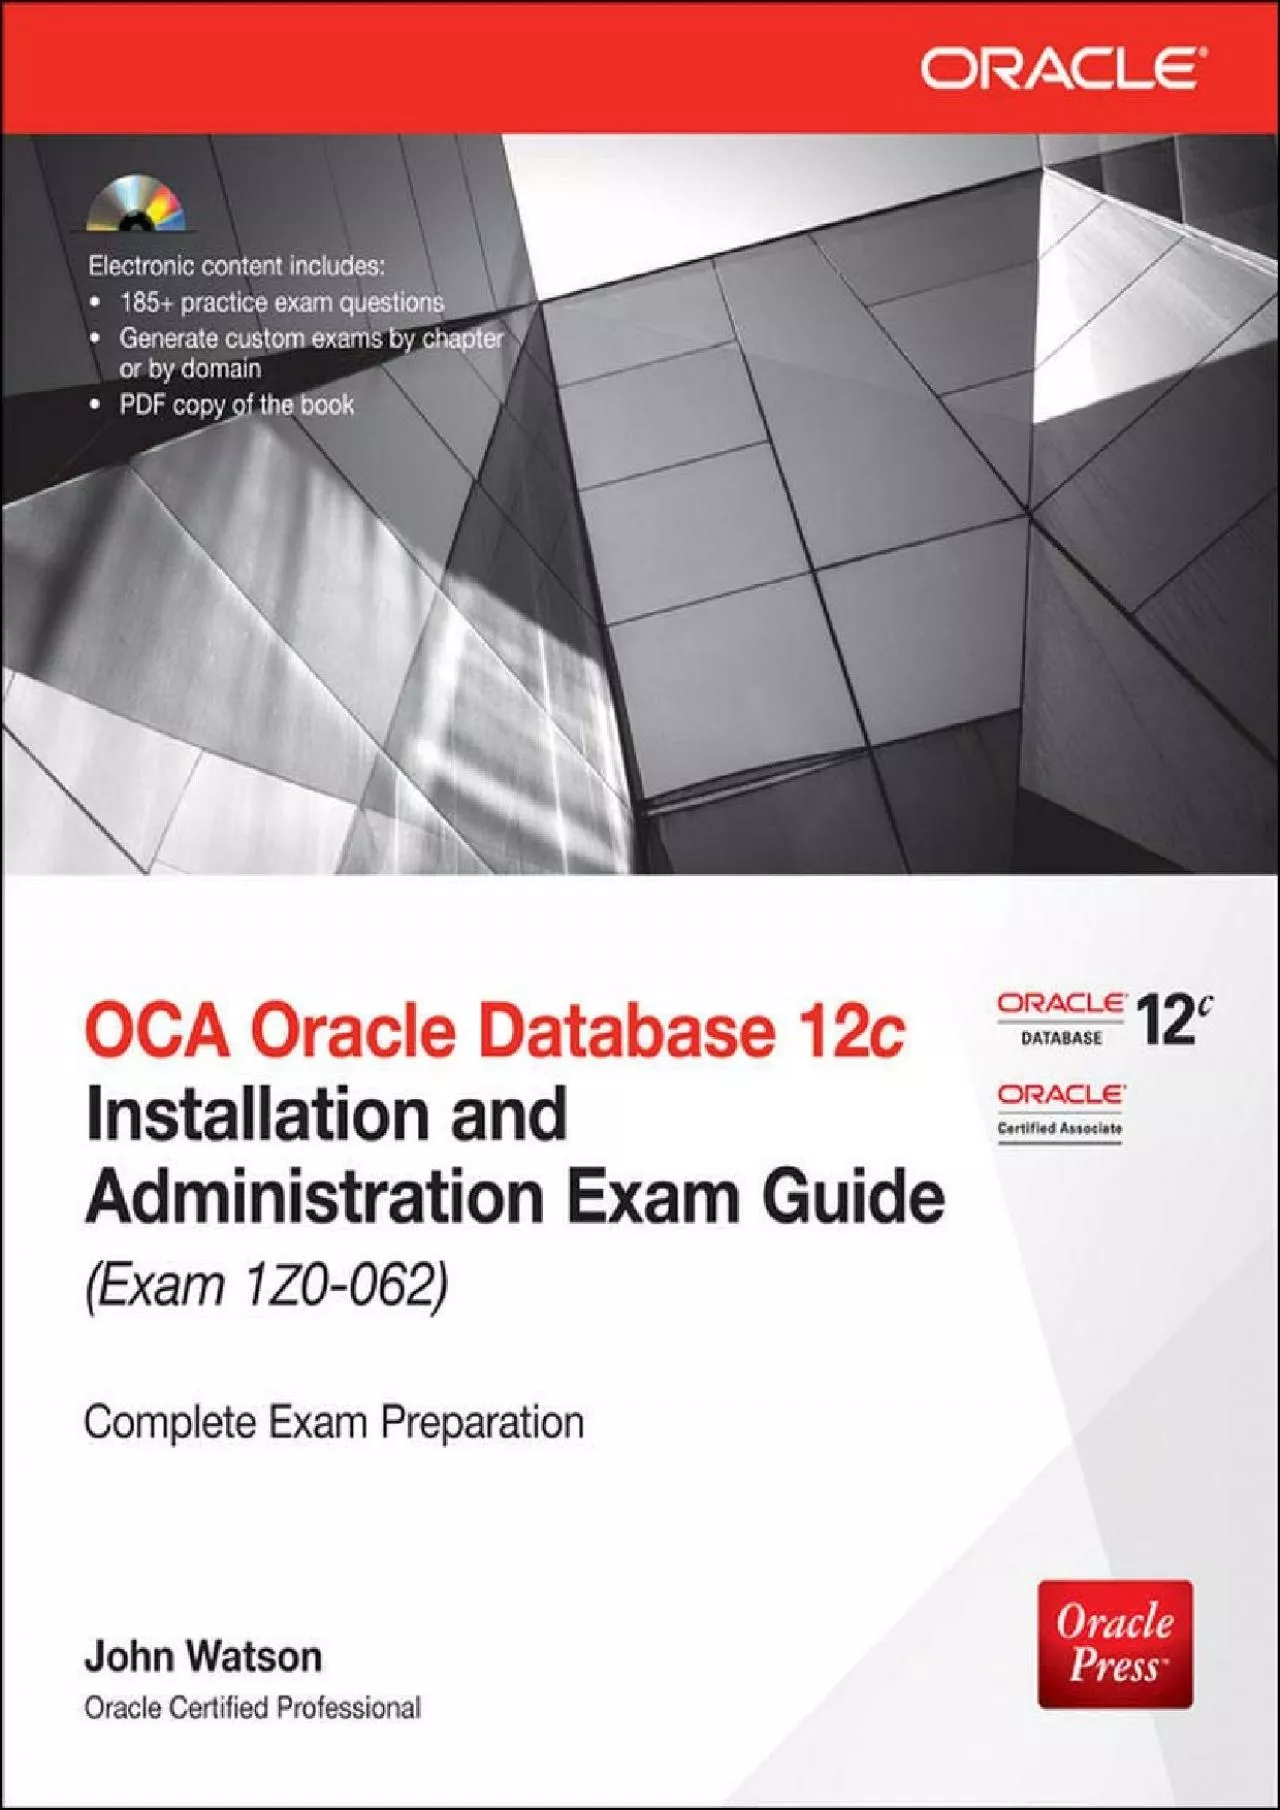 [eBOOK]-OCA Oracle Database 12c Installation and Administration Exam Guide (Exam 1Z0-062)